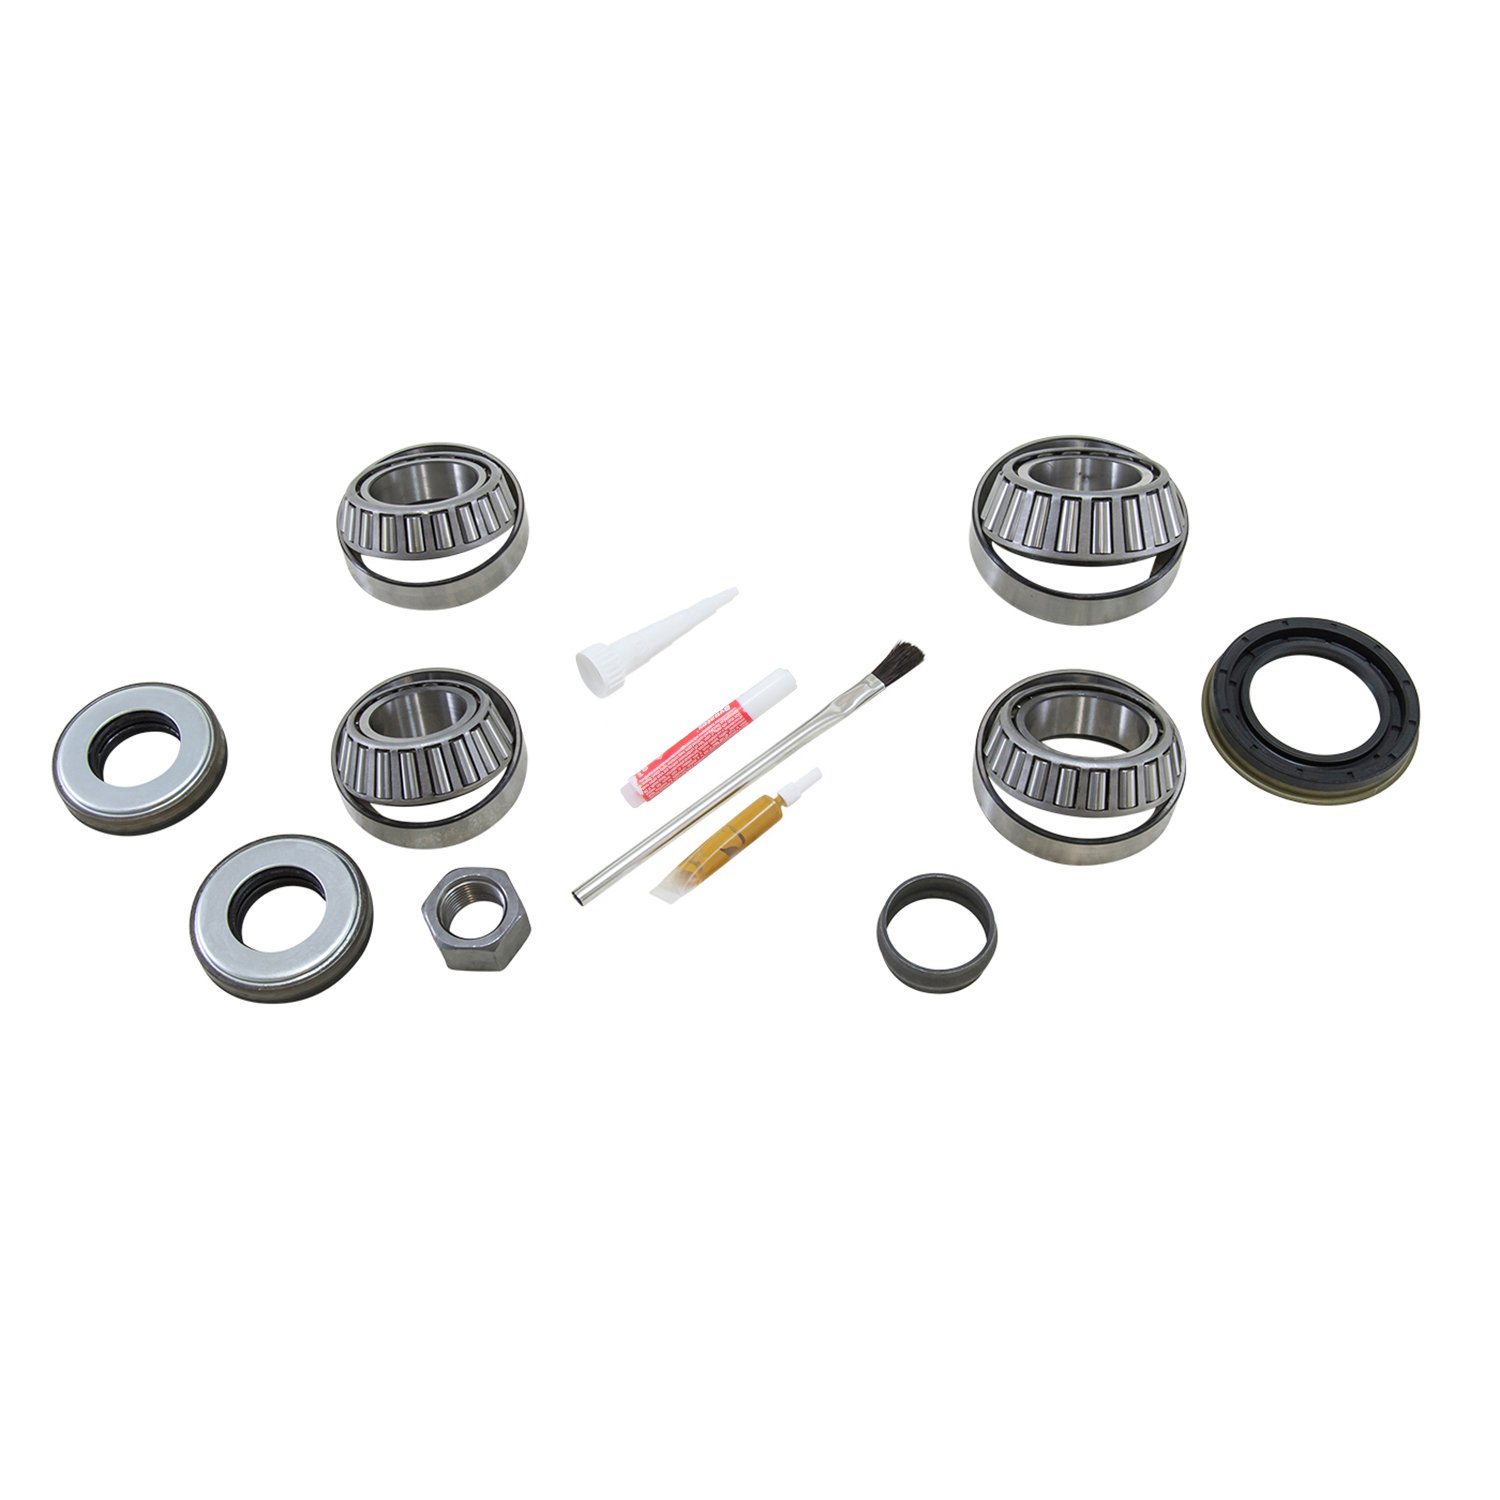 USA Standard 58023 Bearing Kit, For '10 & Down GM 9.25 in. Ifs Front.